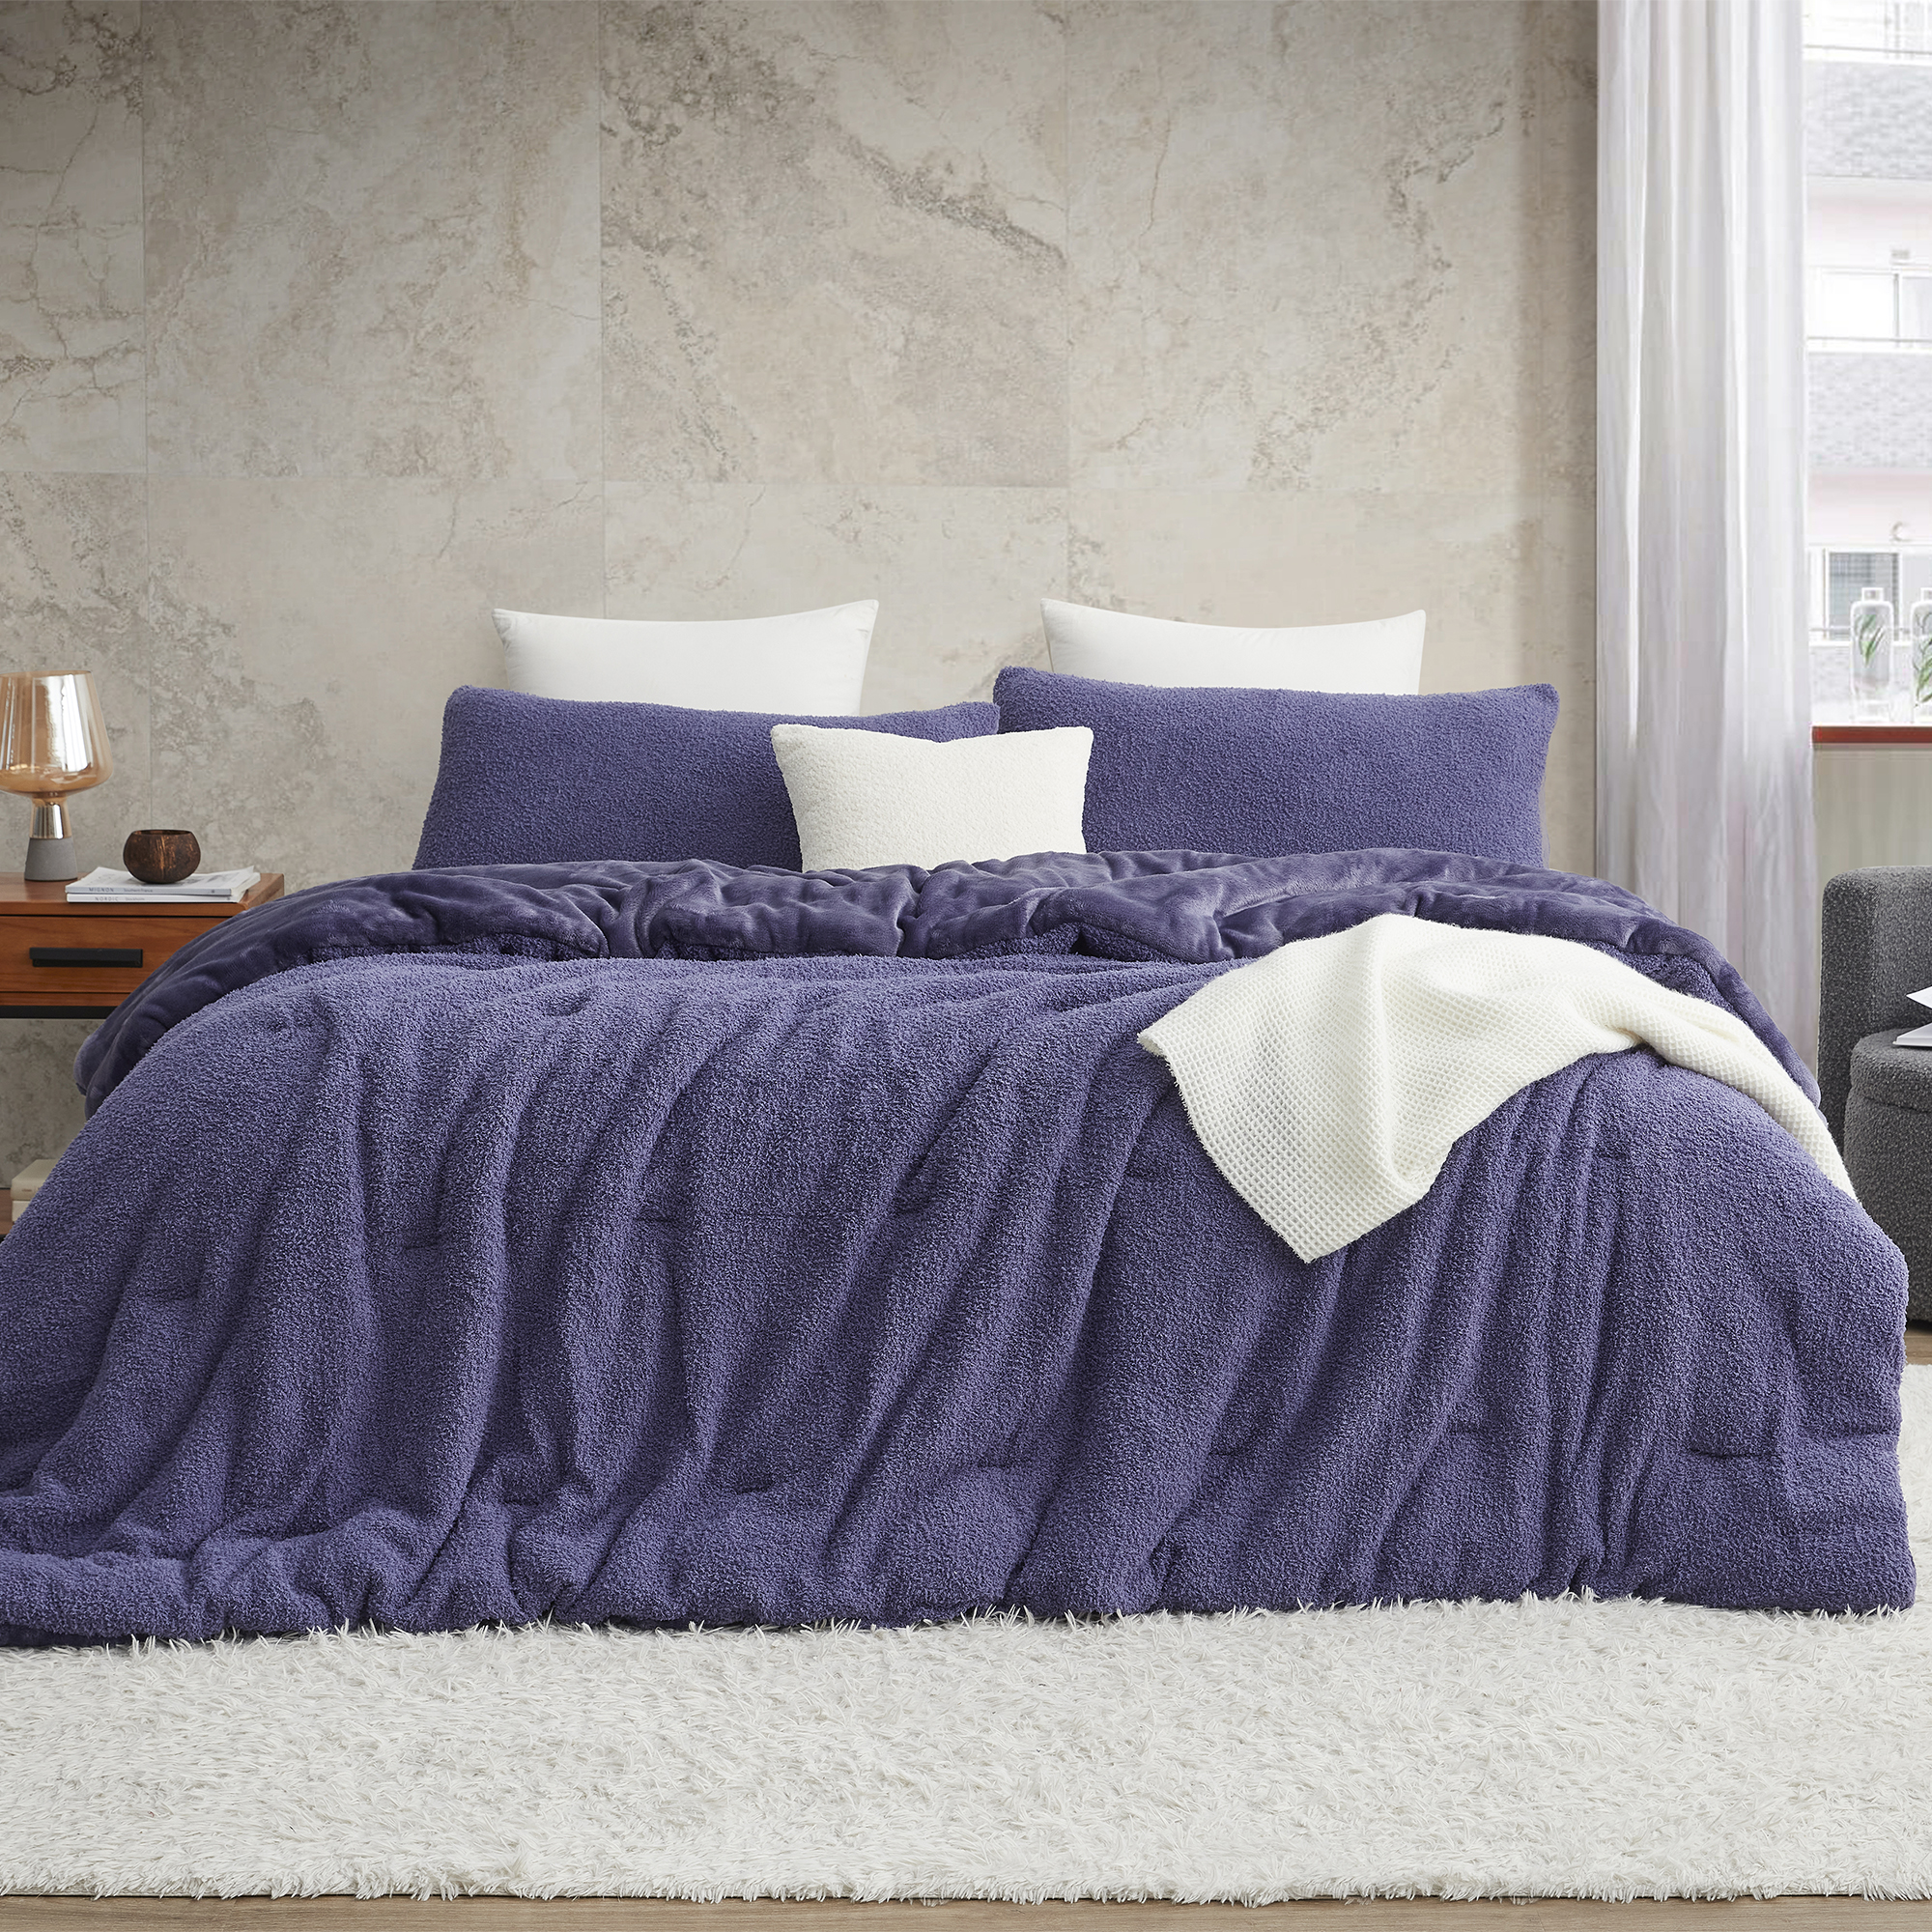 Cardigan Knit - Coma Inducer® Oversized Queen Comforter - Blueberry Purple